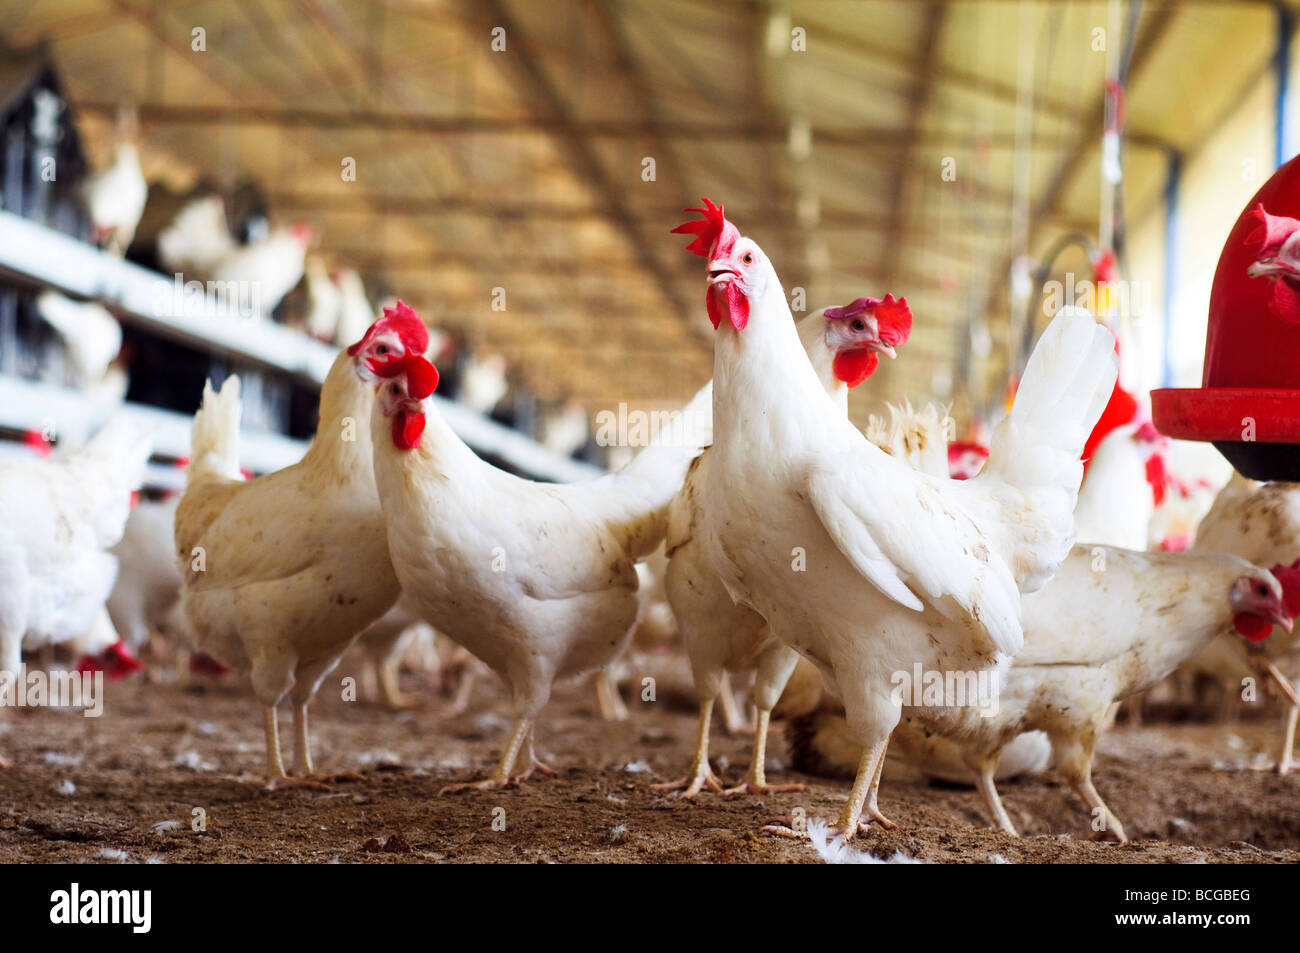 Hens in an organic free roaming chicken coop a producer of Freedom Eggs Stock Photo